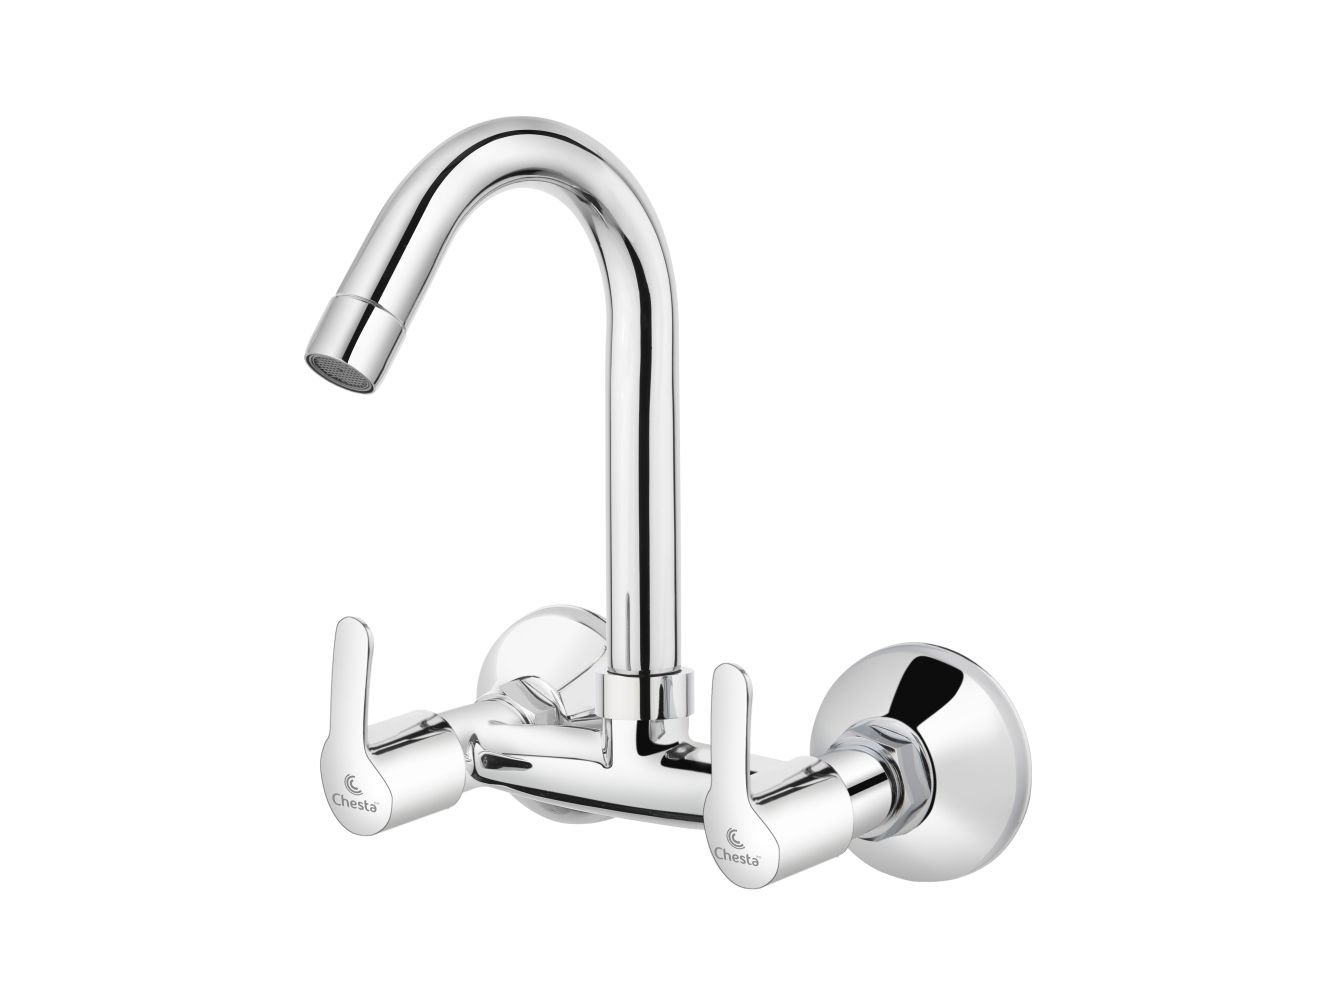 DR - 1021 - Sink Mixer by Chesta Bath Fittings